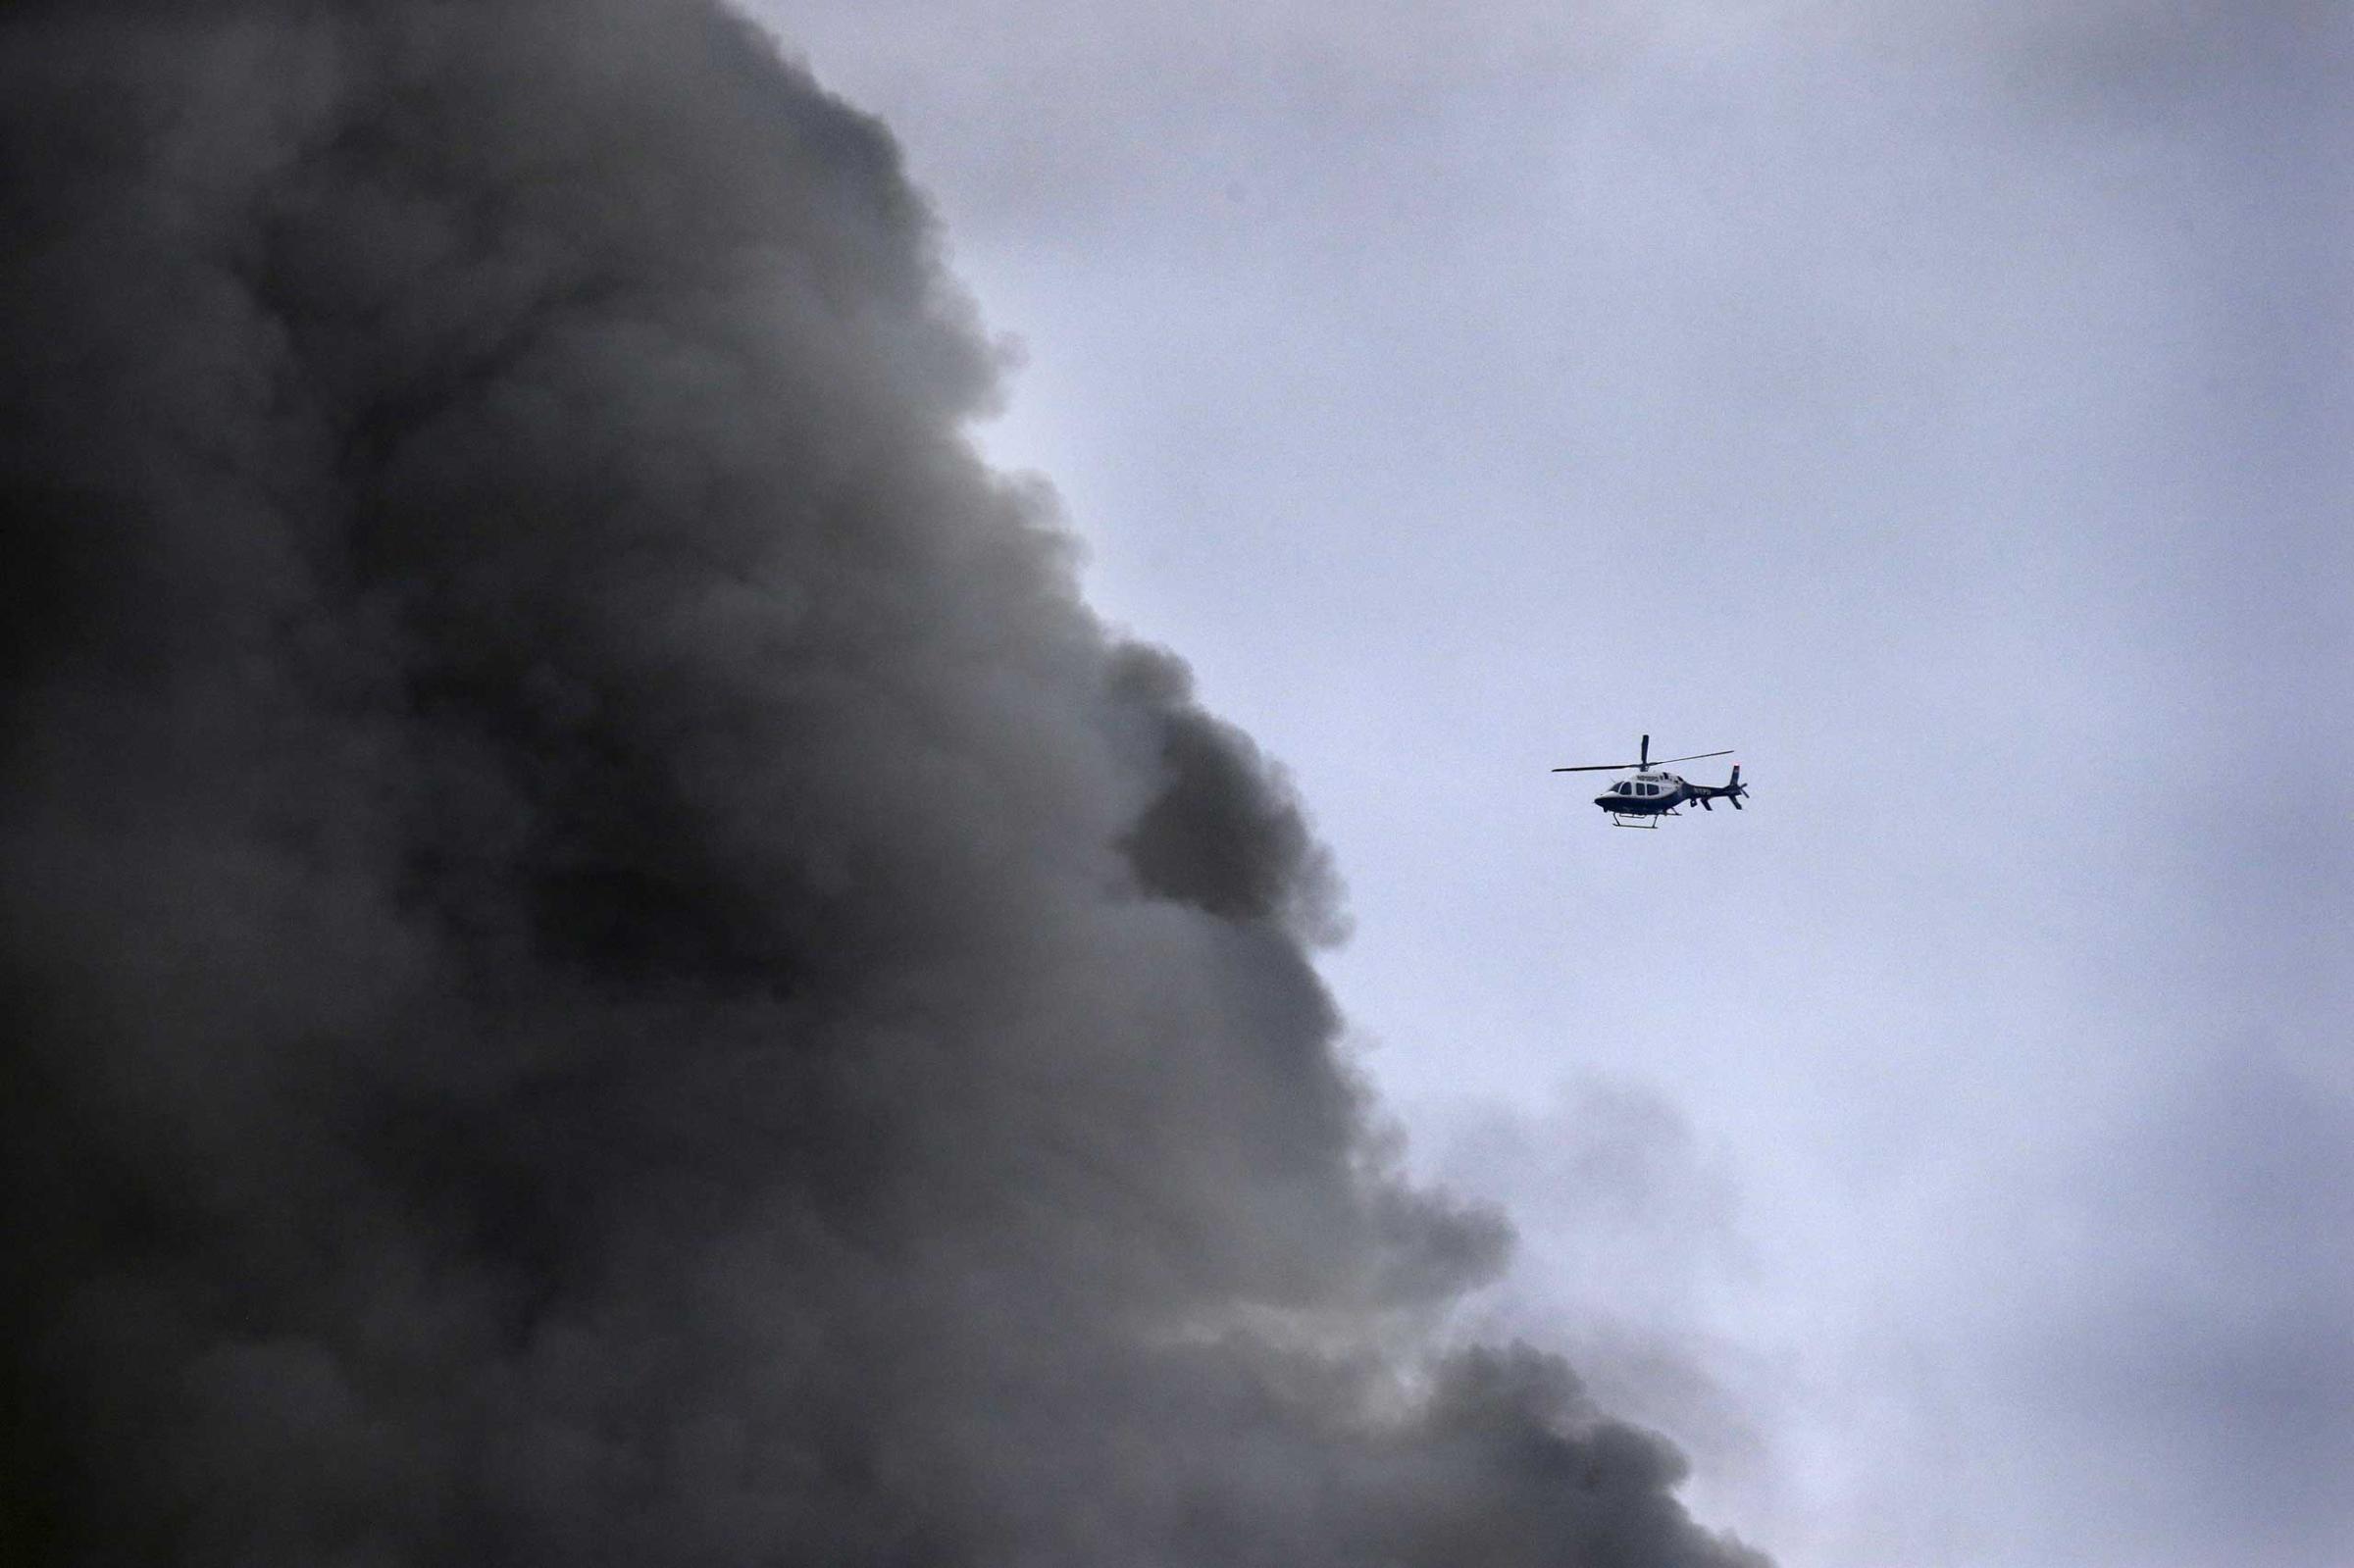 A New York City Police helicopter flies near billowing smoke above the site of a residential apartment building collapse and fire in New York City's East Village neighborhood